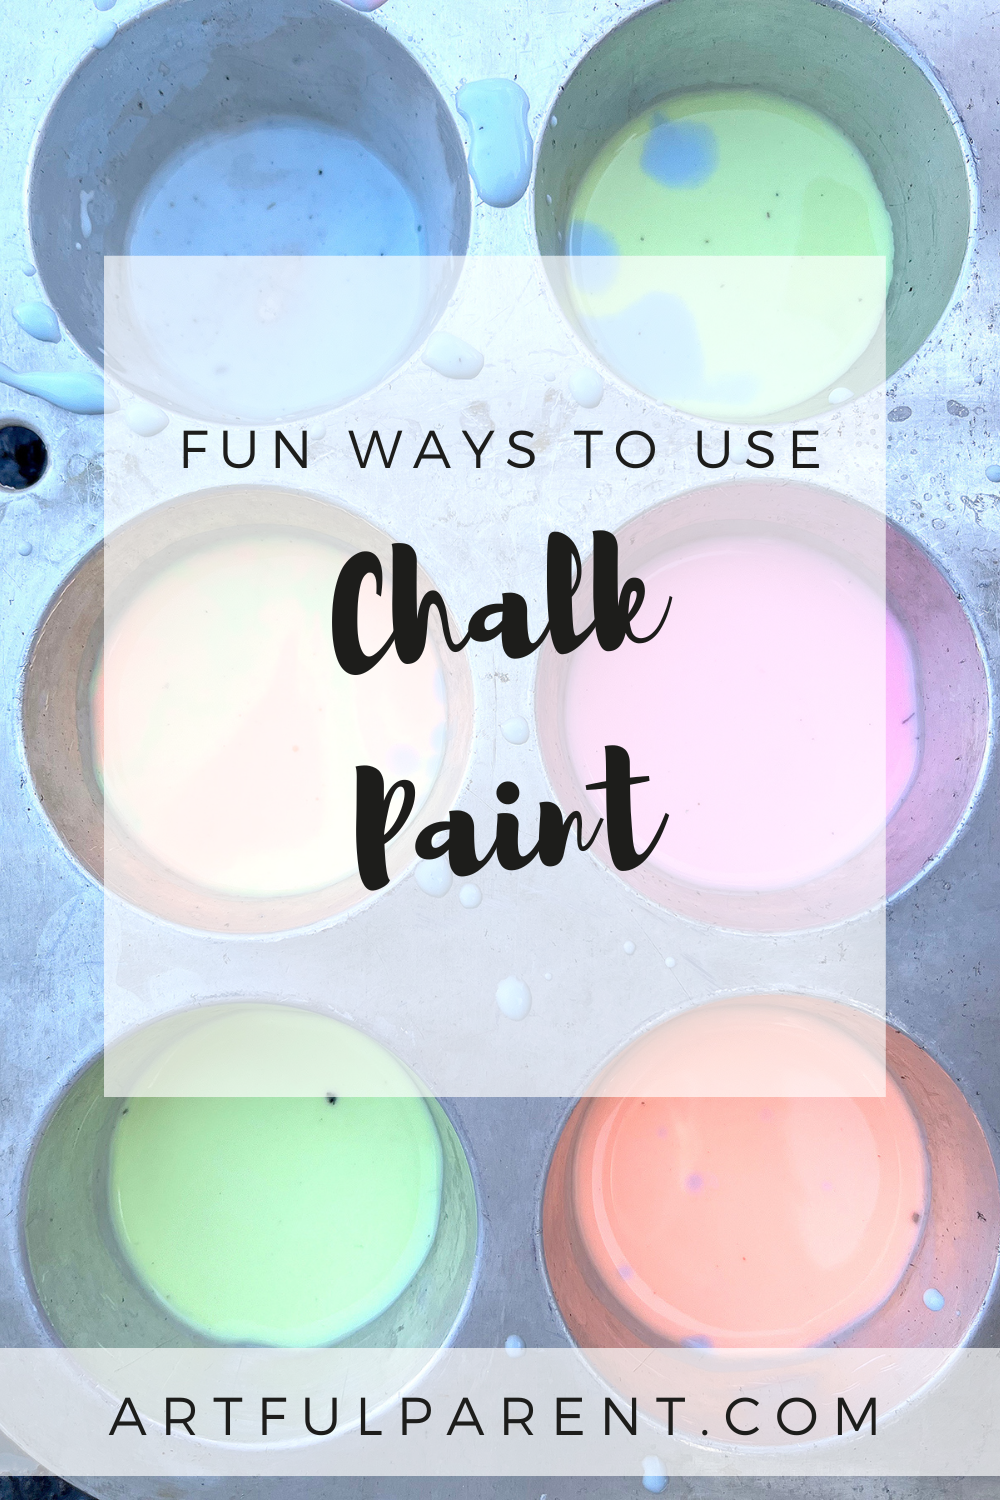 Fun Ideas for Using Chalk Paint with Kids